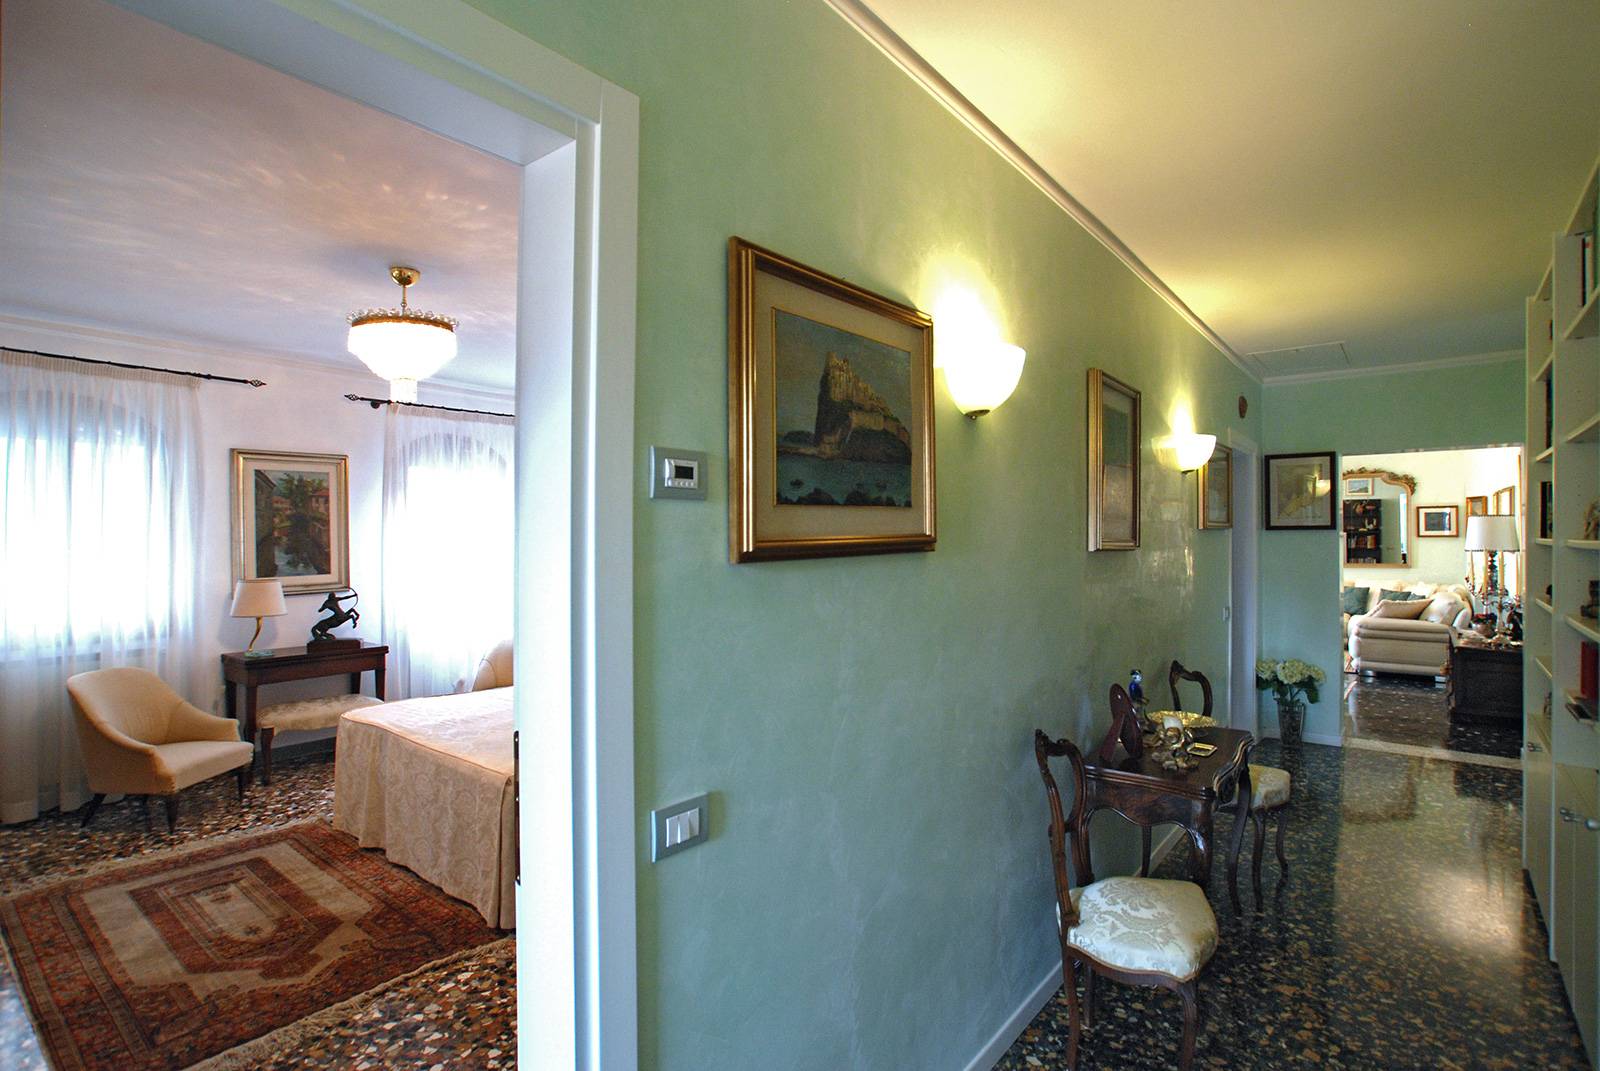 the second bedroom can be accessed from the central corridor